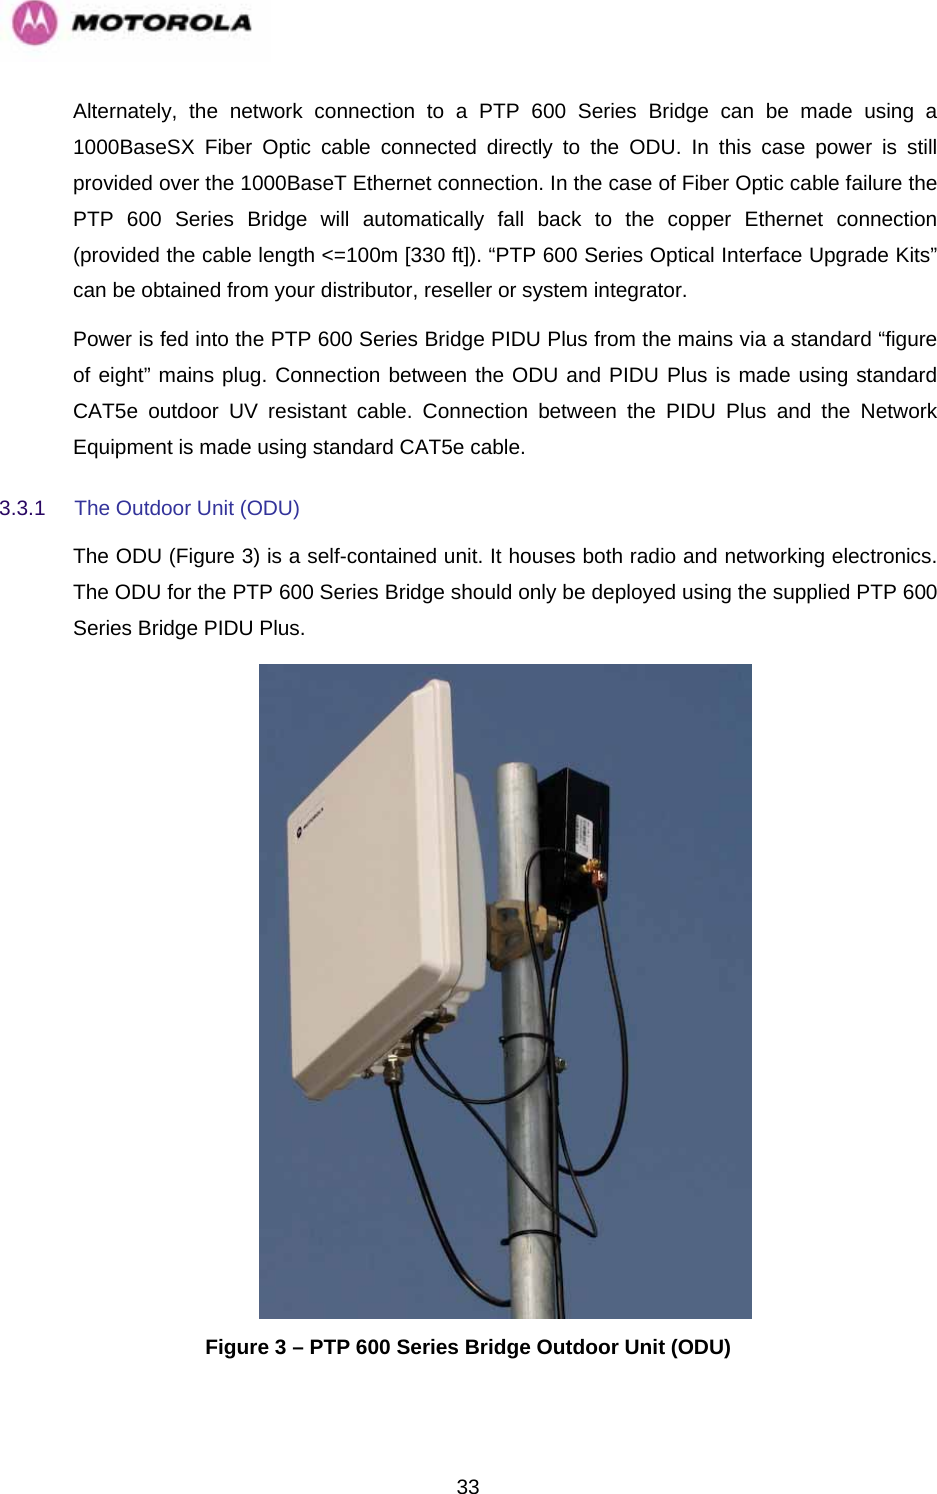   33Alternately, the network connection to a PTP 600 Series Bridge can be made using a 1000BaseSX Fiber Optic cable connected directly to the ODU. In this case power is still provided over the 1000BaseT Ethernet connection. In the case of Fiber Optic cable failure the PTP 600 Series Bridge will automatically fall back to the copper Ethernet connection (provided the cable length &lt;=100m [330 ft]). “PTP 600 Series Optical Interface Upgrade Kits” can be obtained from your distributor, reseller or system integrator. Power is fed into the PTP 600 Series Bridge PIDU Plus from the mains via a standard “figure of eight” mains plug. Connection between the ODU and PIDU Plus is made using standard CAT5e outdoor UV resistant cable. Connection between the PIDU Plus and the Network Equipment is made using standard CAT5e cable. 3.3.1  The Outdoor Unit (ODU) The ODU (Figure 3) is a self-contained unit. It houses both radio and networking electronics. The ODU for the PTP 600 Series Bridge should only be deployed using the supplied PTP 600 Series Bridge PIDU Plus.   Figure 3 – PTP 600 Series Bridge Outdoor Unit (ODU) 